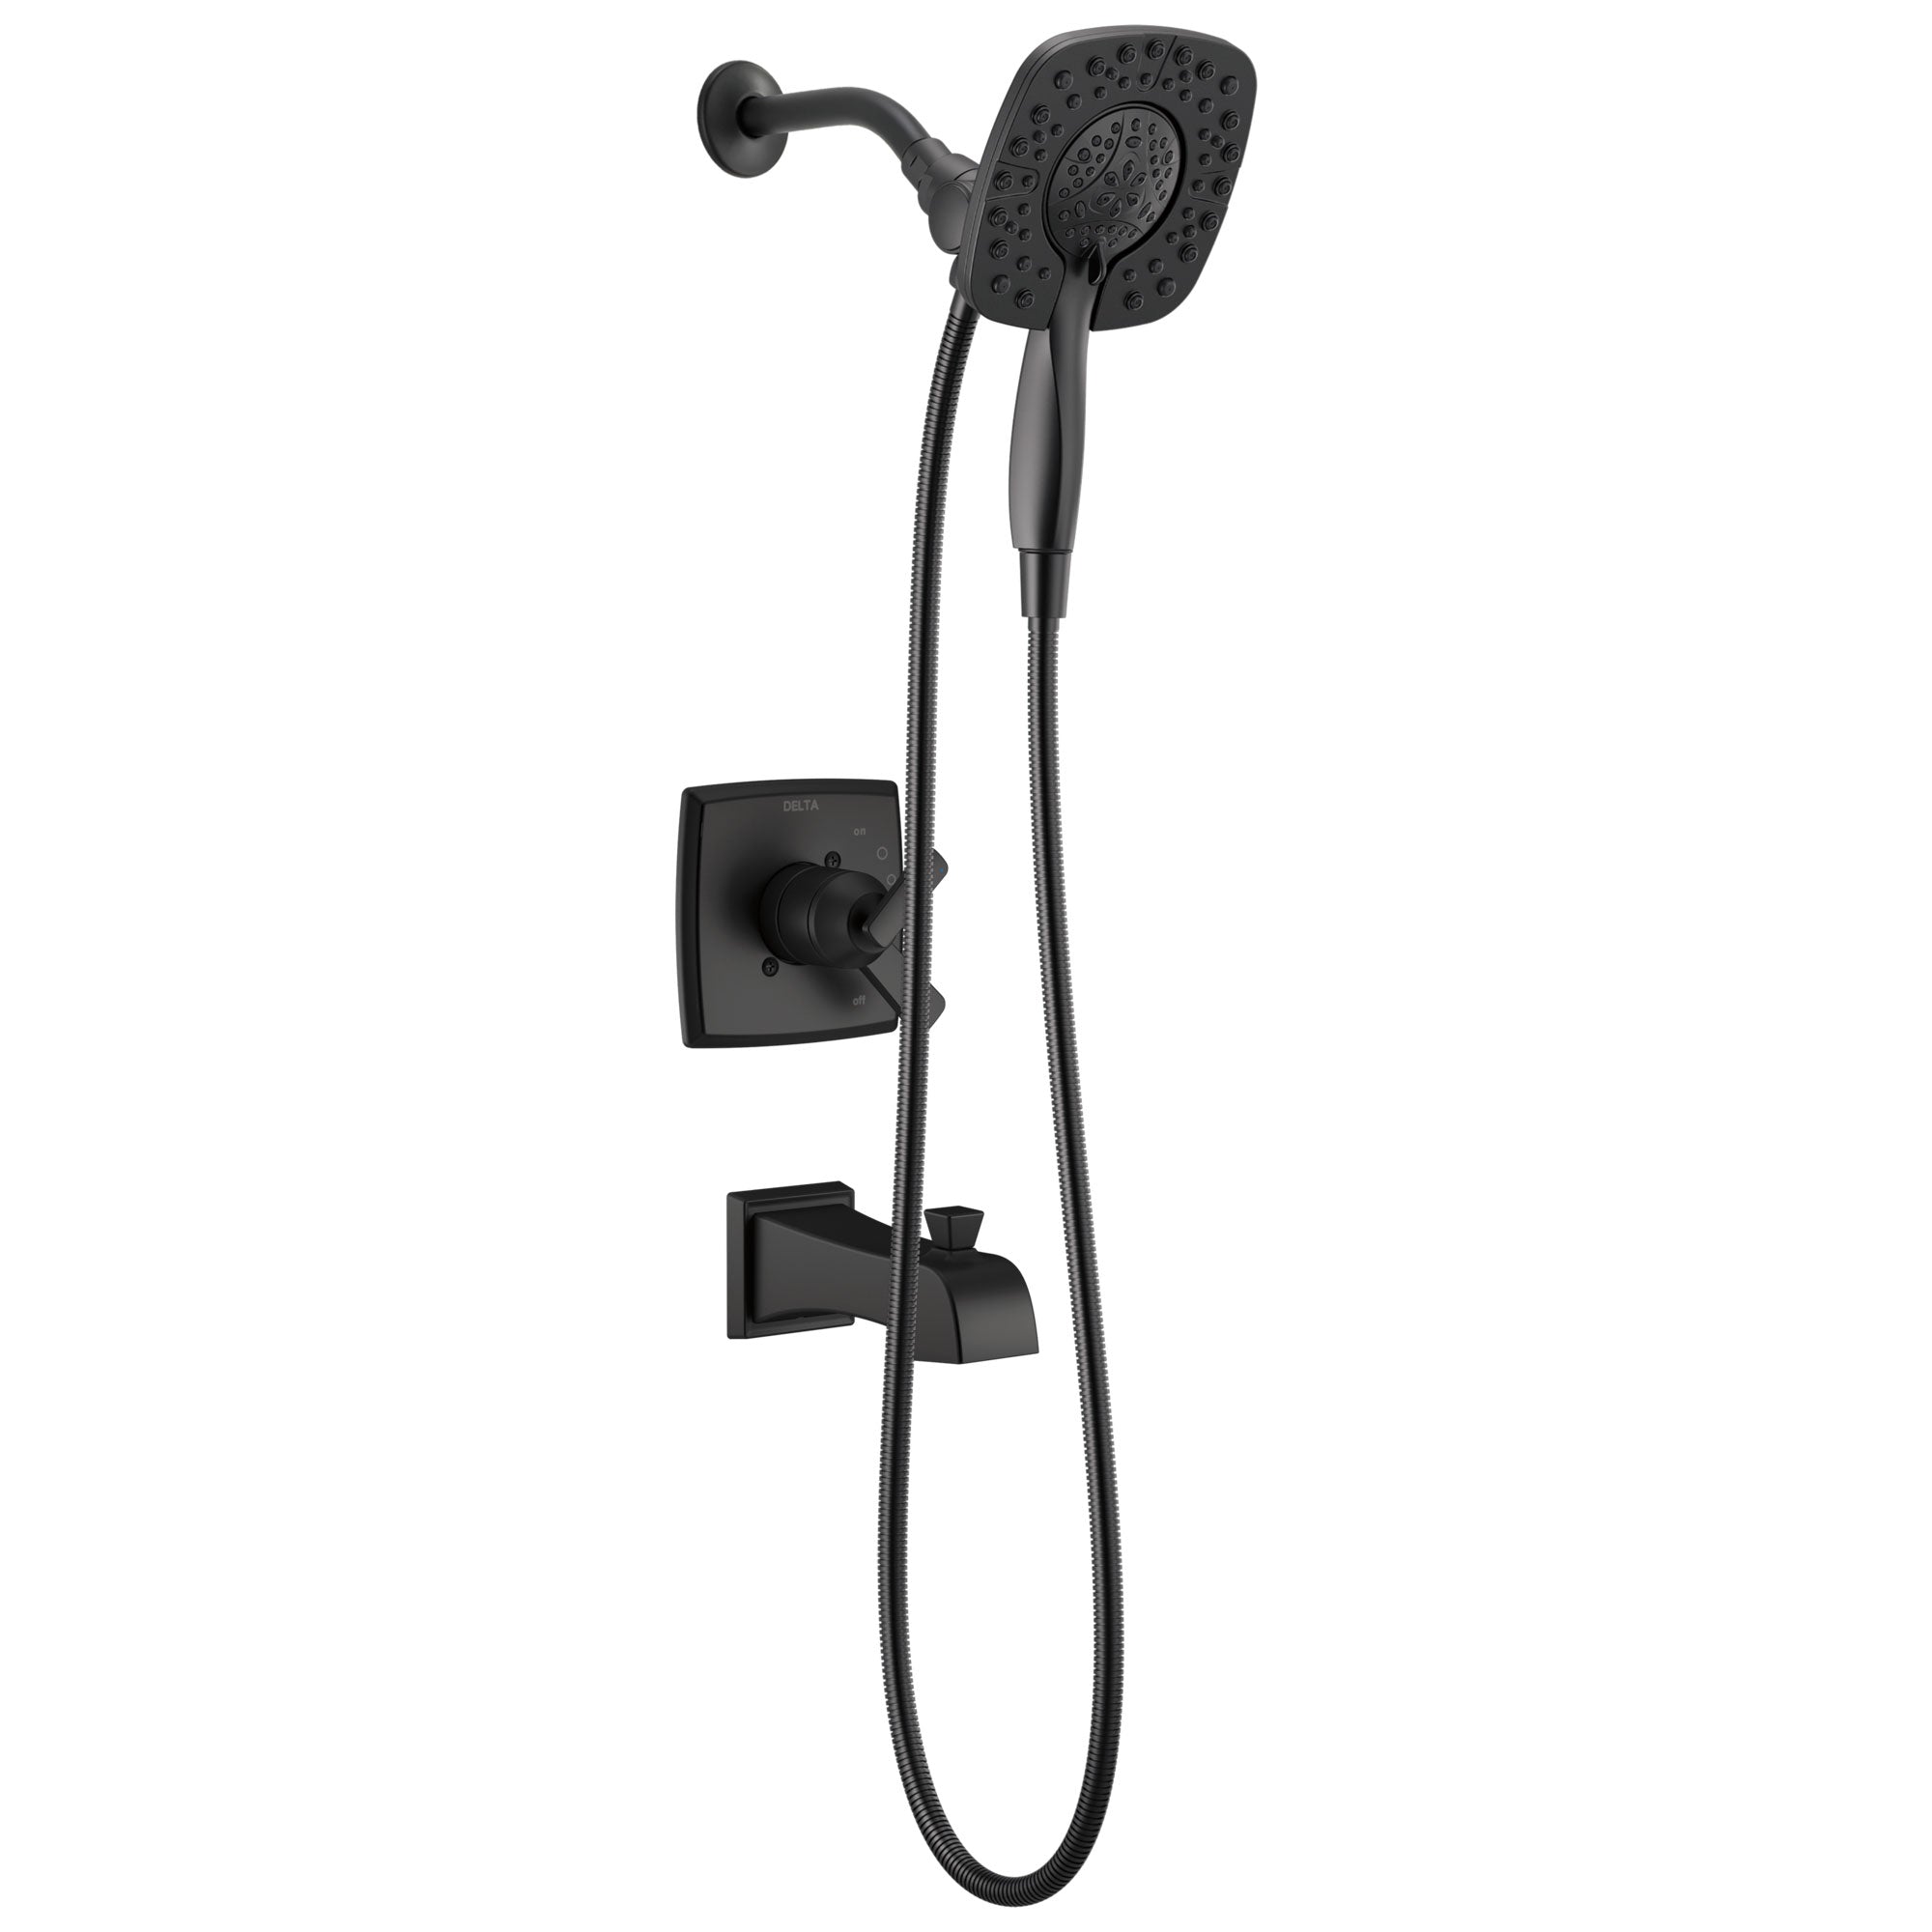 Delta Ashlyn Matte Black Finish Monitor 17 Series In2ition Showerhead/Hand Shower and Tub Spout Combo Trim Kit (Requires Valve) DT17464BLI